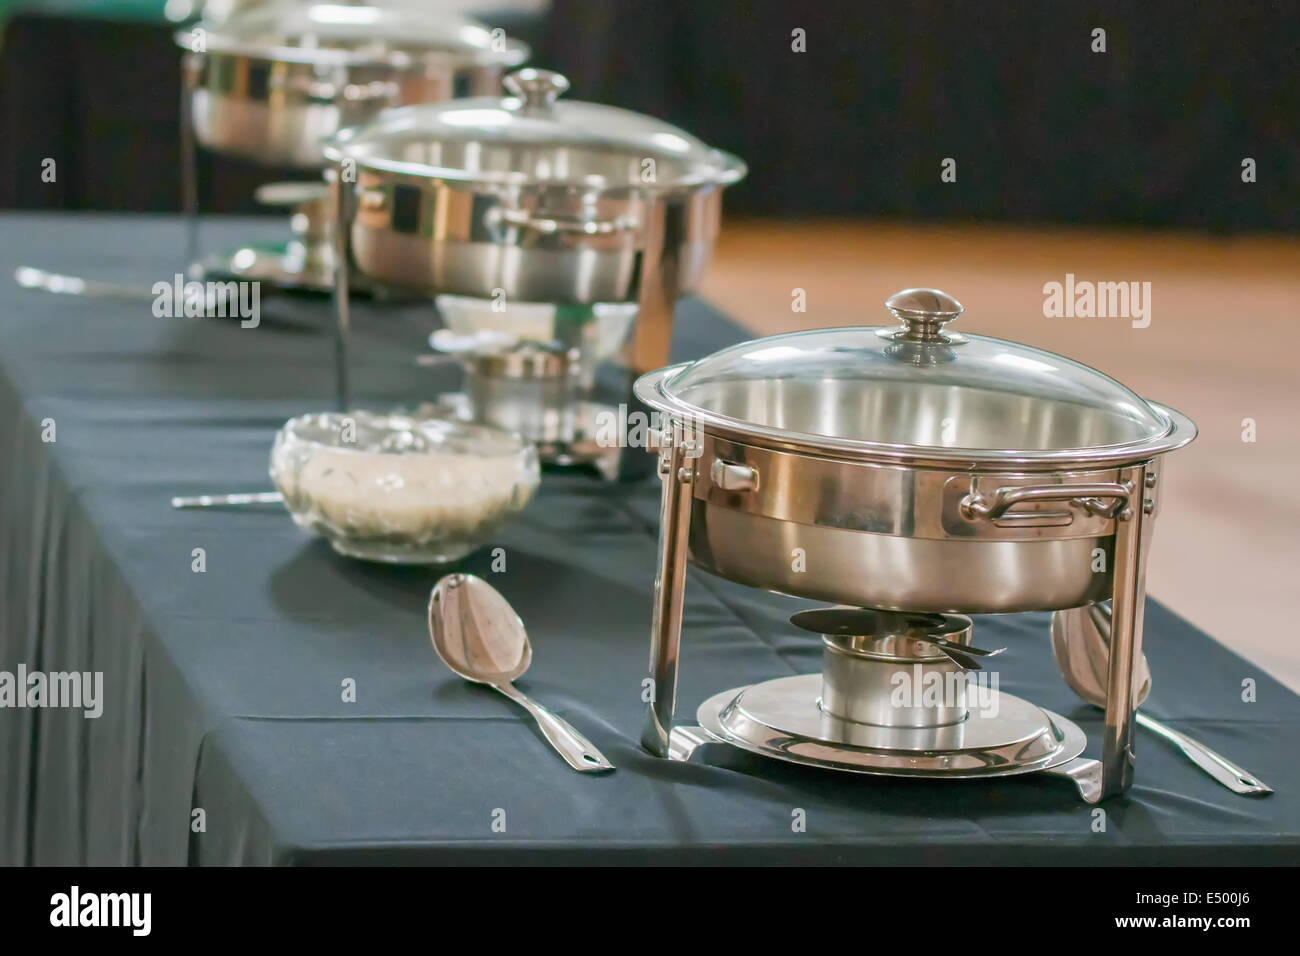 banquet table with chafing dish heaters Stock Photo